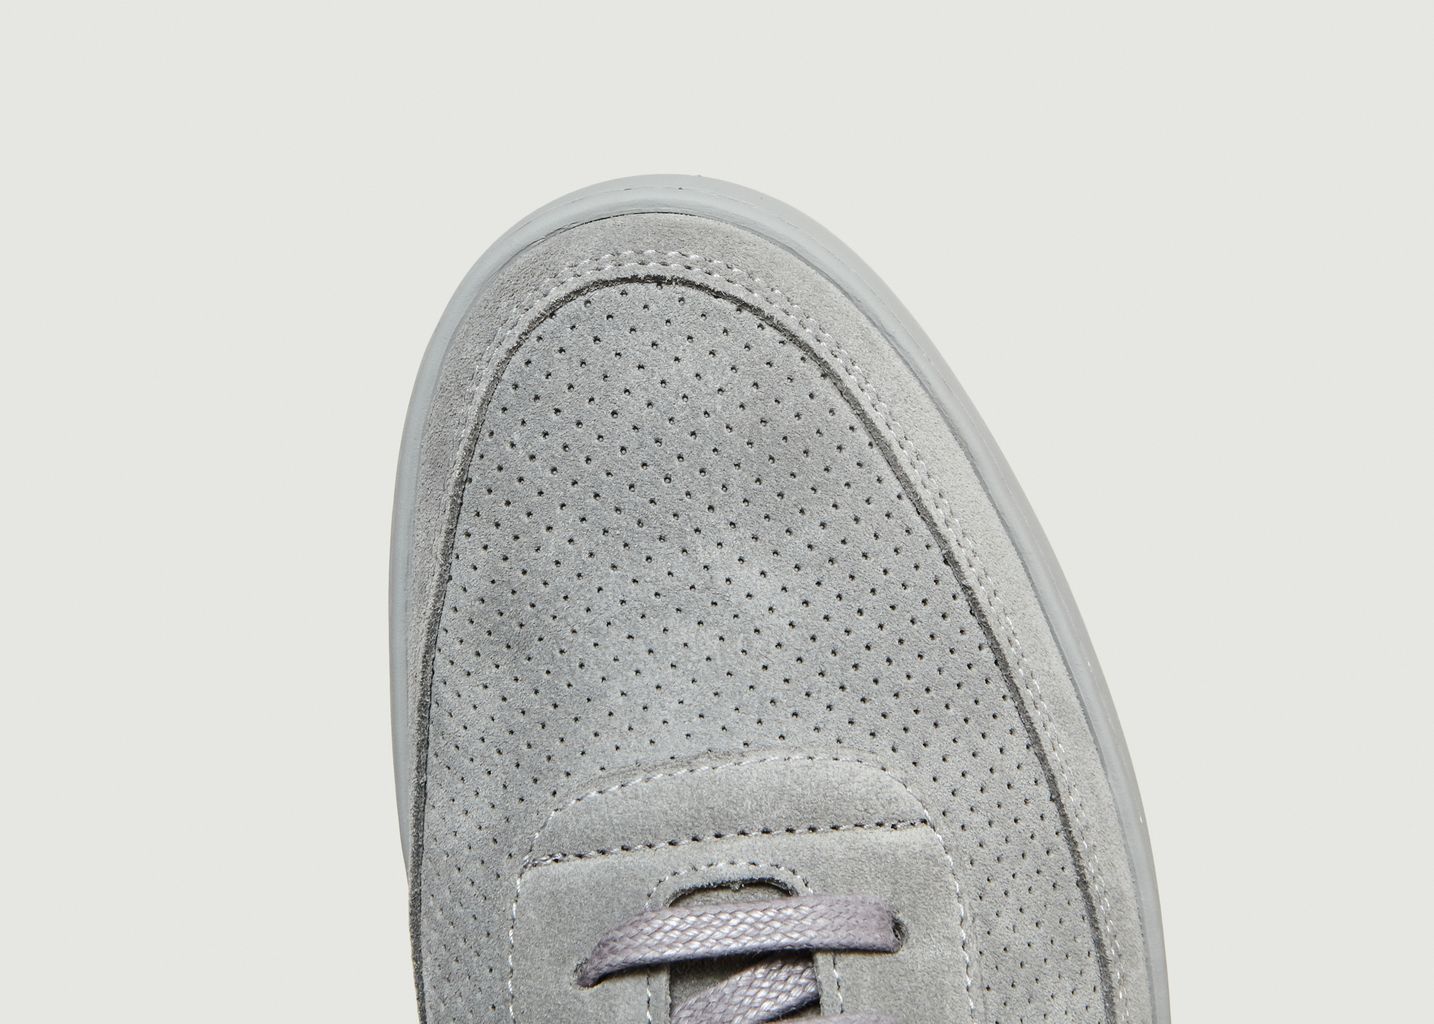 Perforated Trainers - Filling Pieces